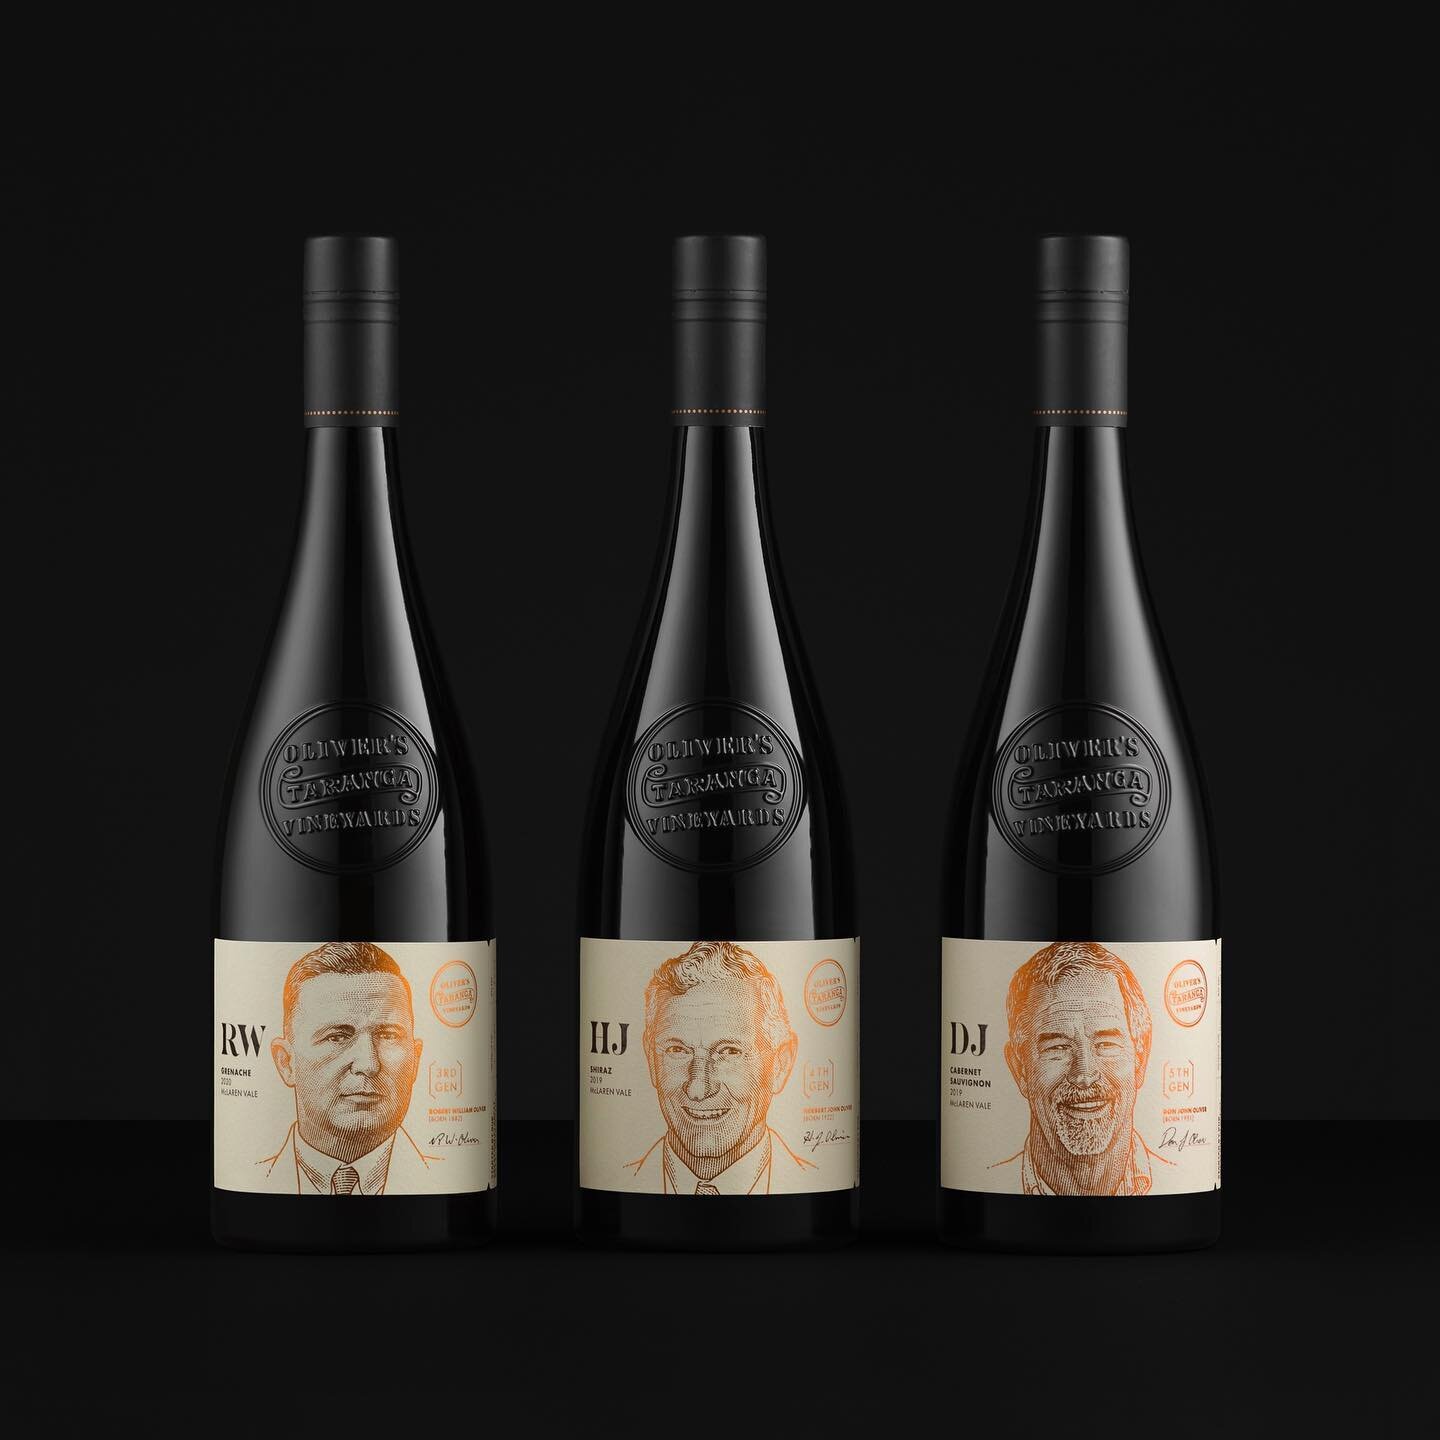 &lsquo;The Greats&rsquo; ~ A shiny new reserve range for @oliverstaranga 
.
&lsquo;The Greats&rsquo; is an exceptional collection of single vineyard wines that pay homage to the Oliver family&rsquo;s rich grape growing history - A huge 181 years in M